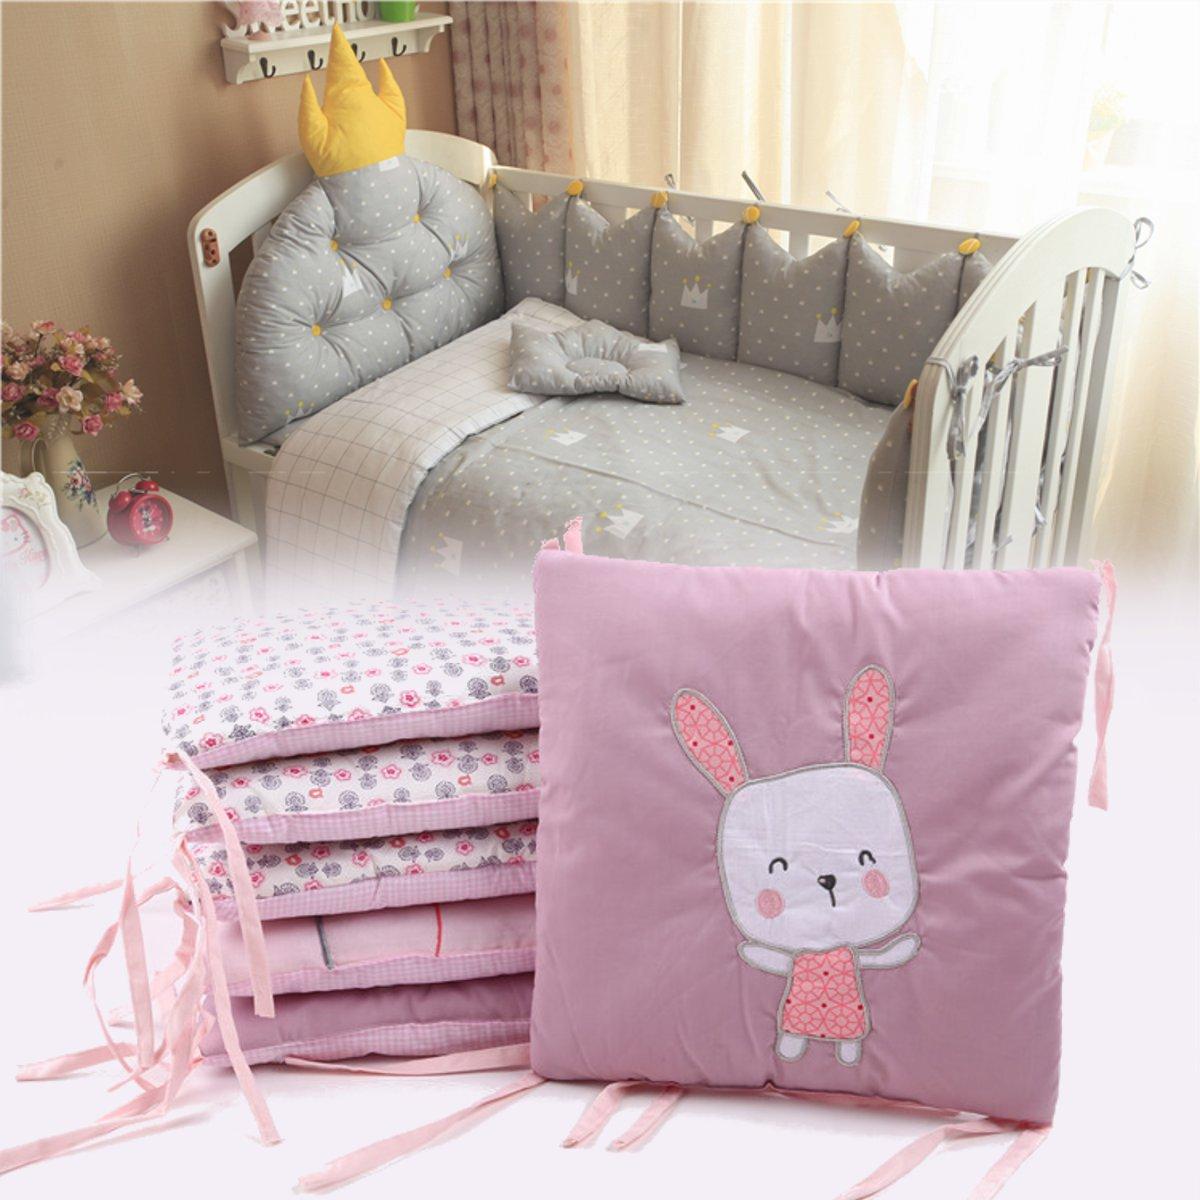 

6Pcs Set Cotton Cot Bumper Baby Crib Infant Toddler Nursery Bed Protector Pillow